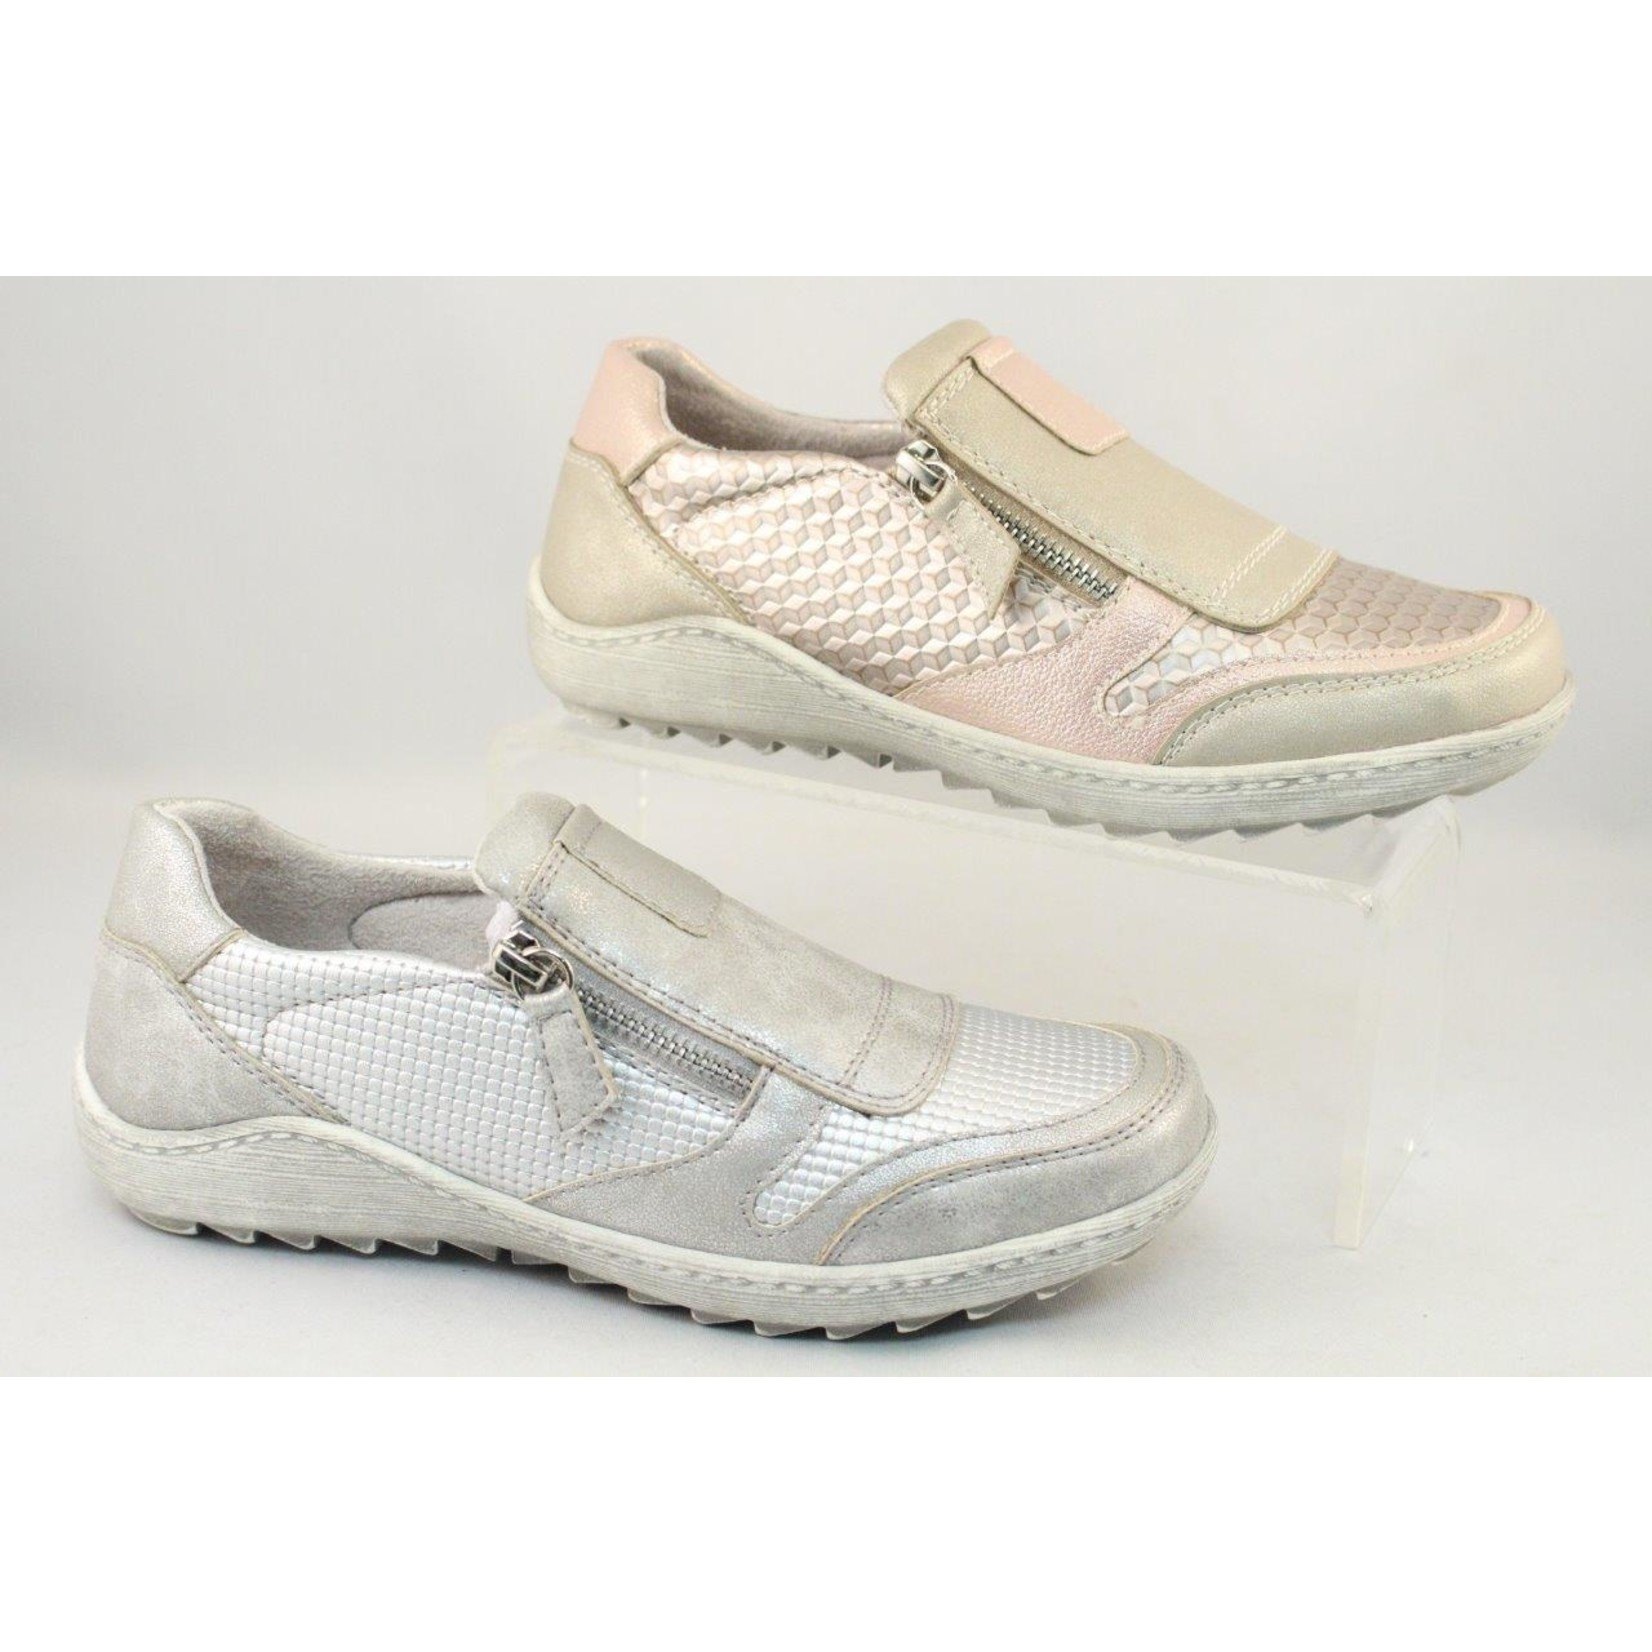 Soft Comfort Soft Comfort closed sneaker with zipper, Only available in grey